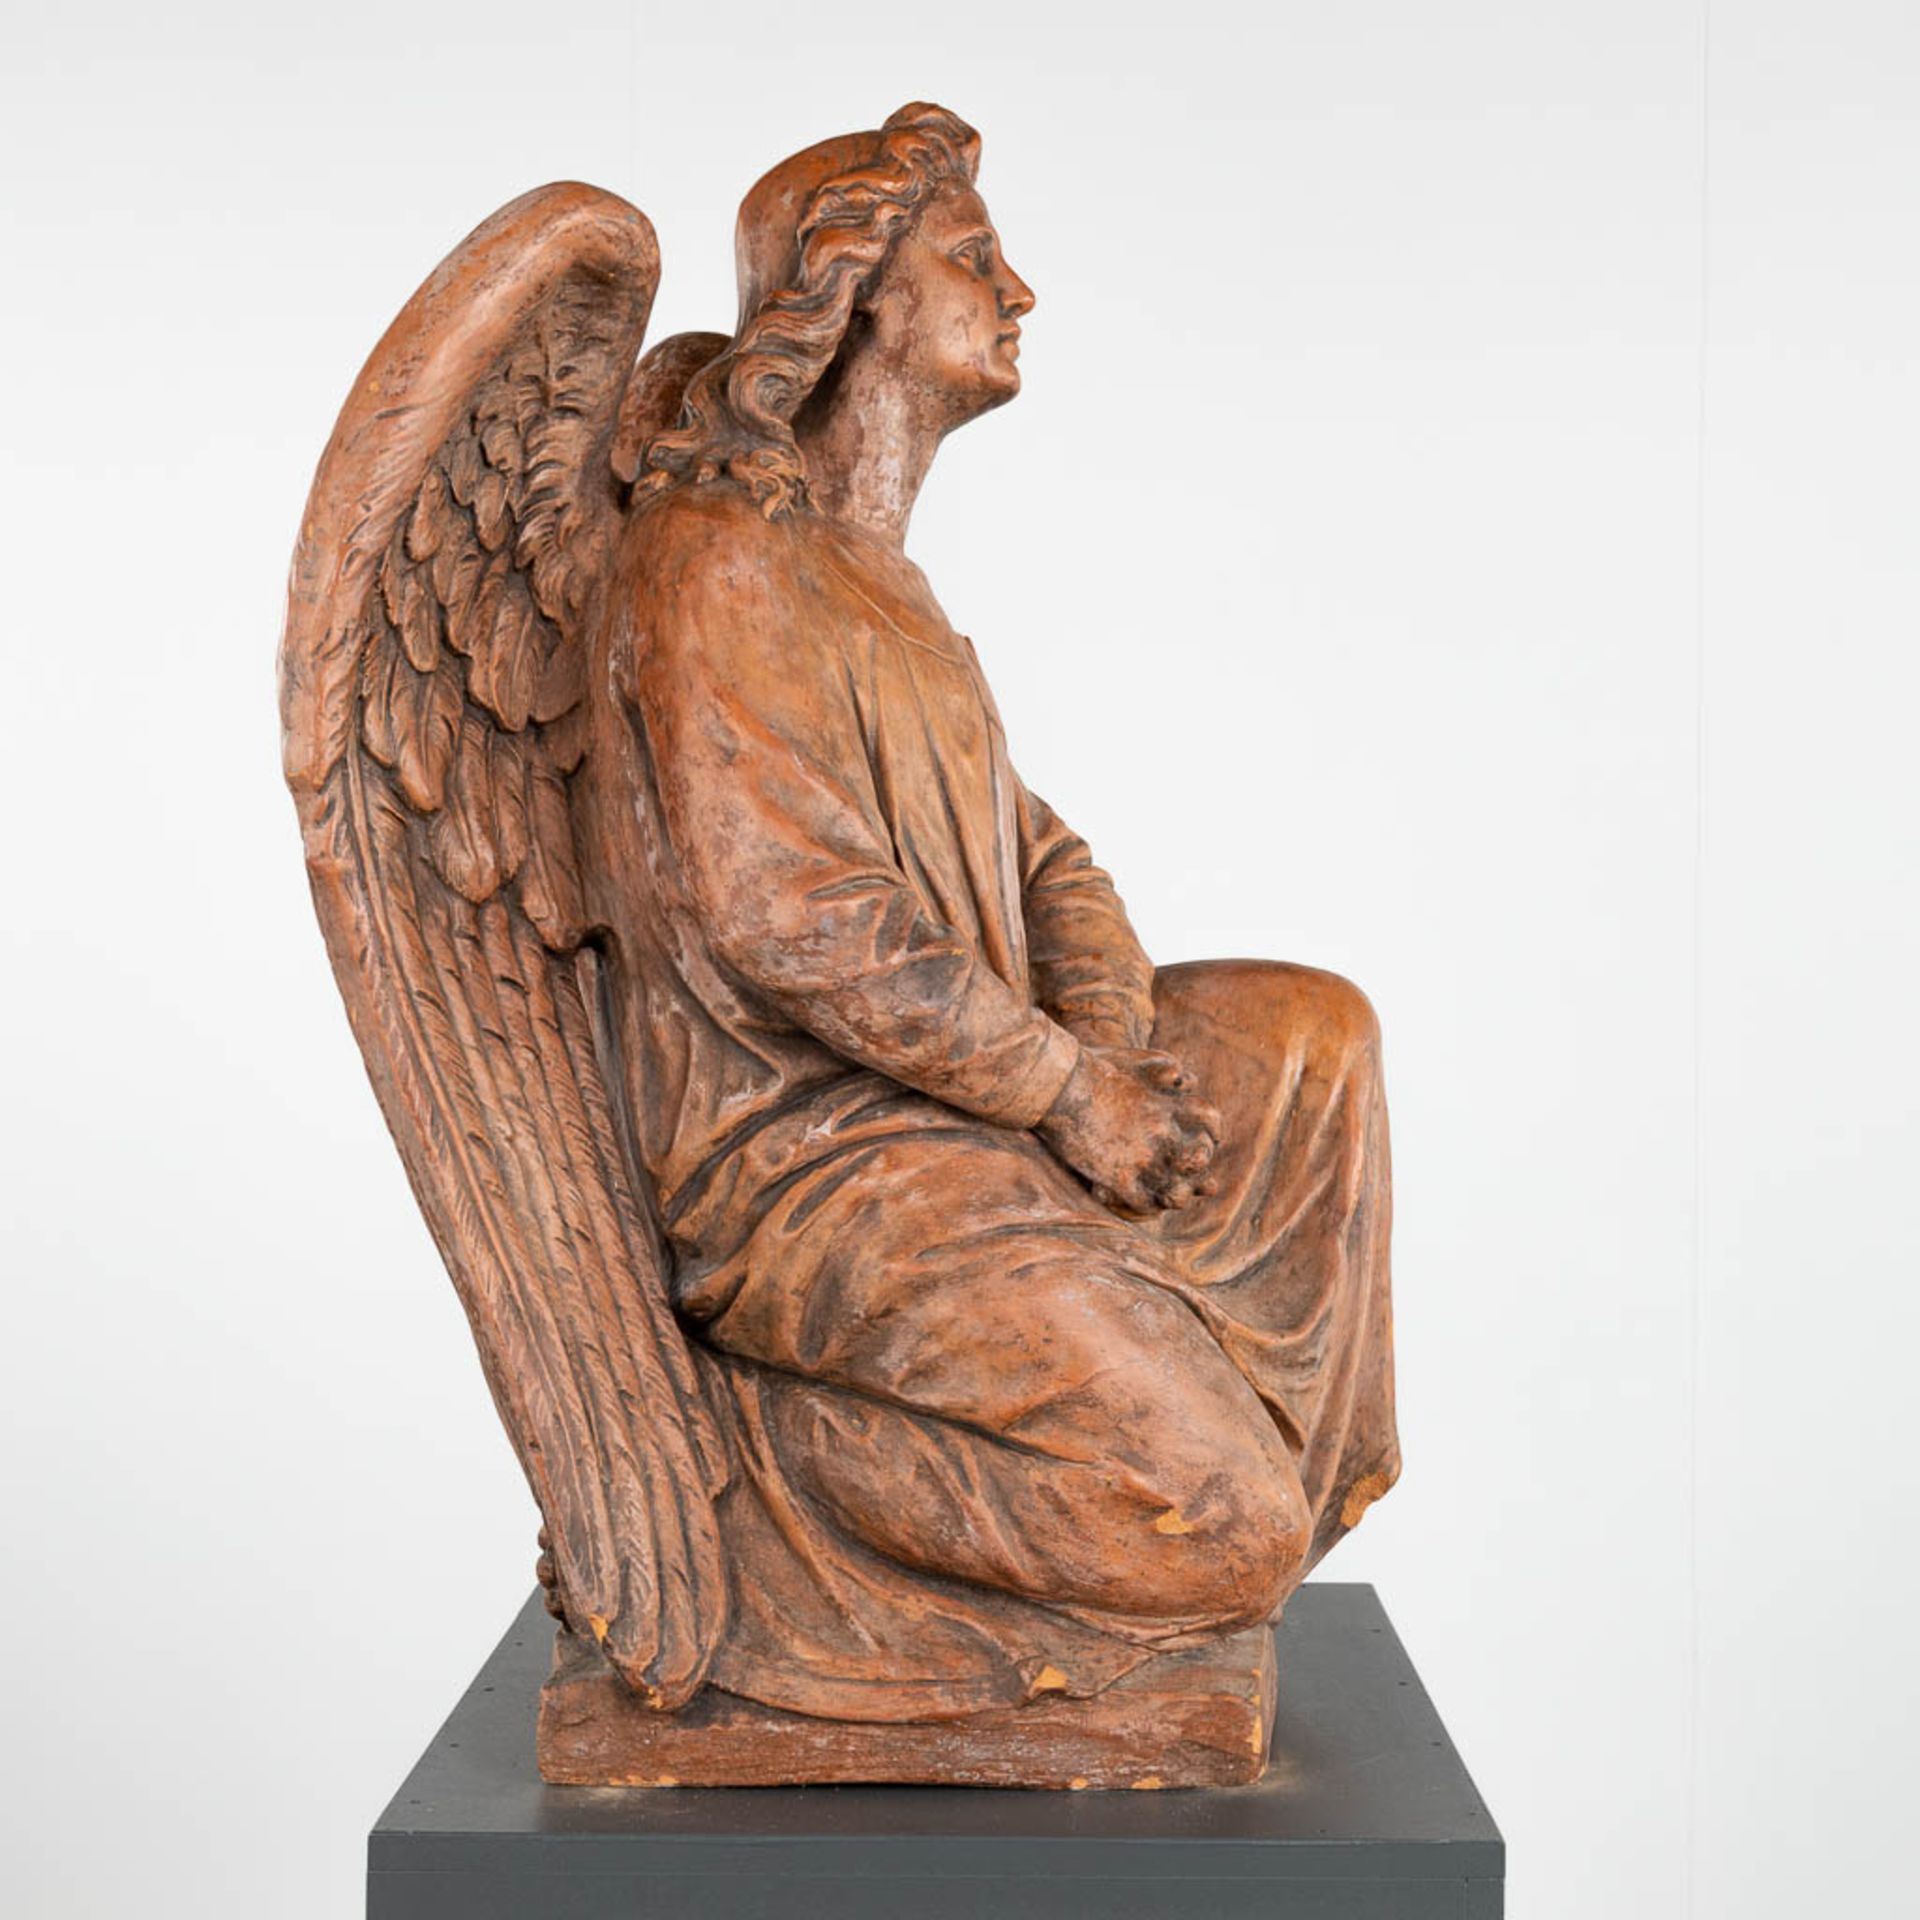 A large figurine of an angel, terracotta. 19th C. (L:45 x W:38 x H:75 cm) - Image 6 of 10